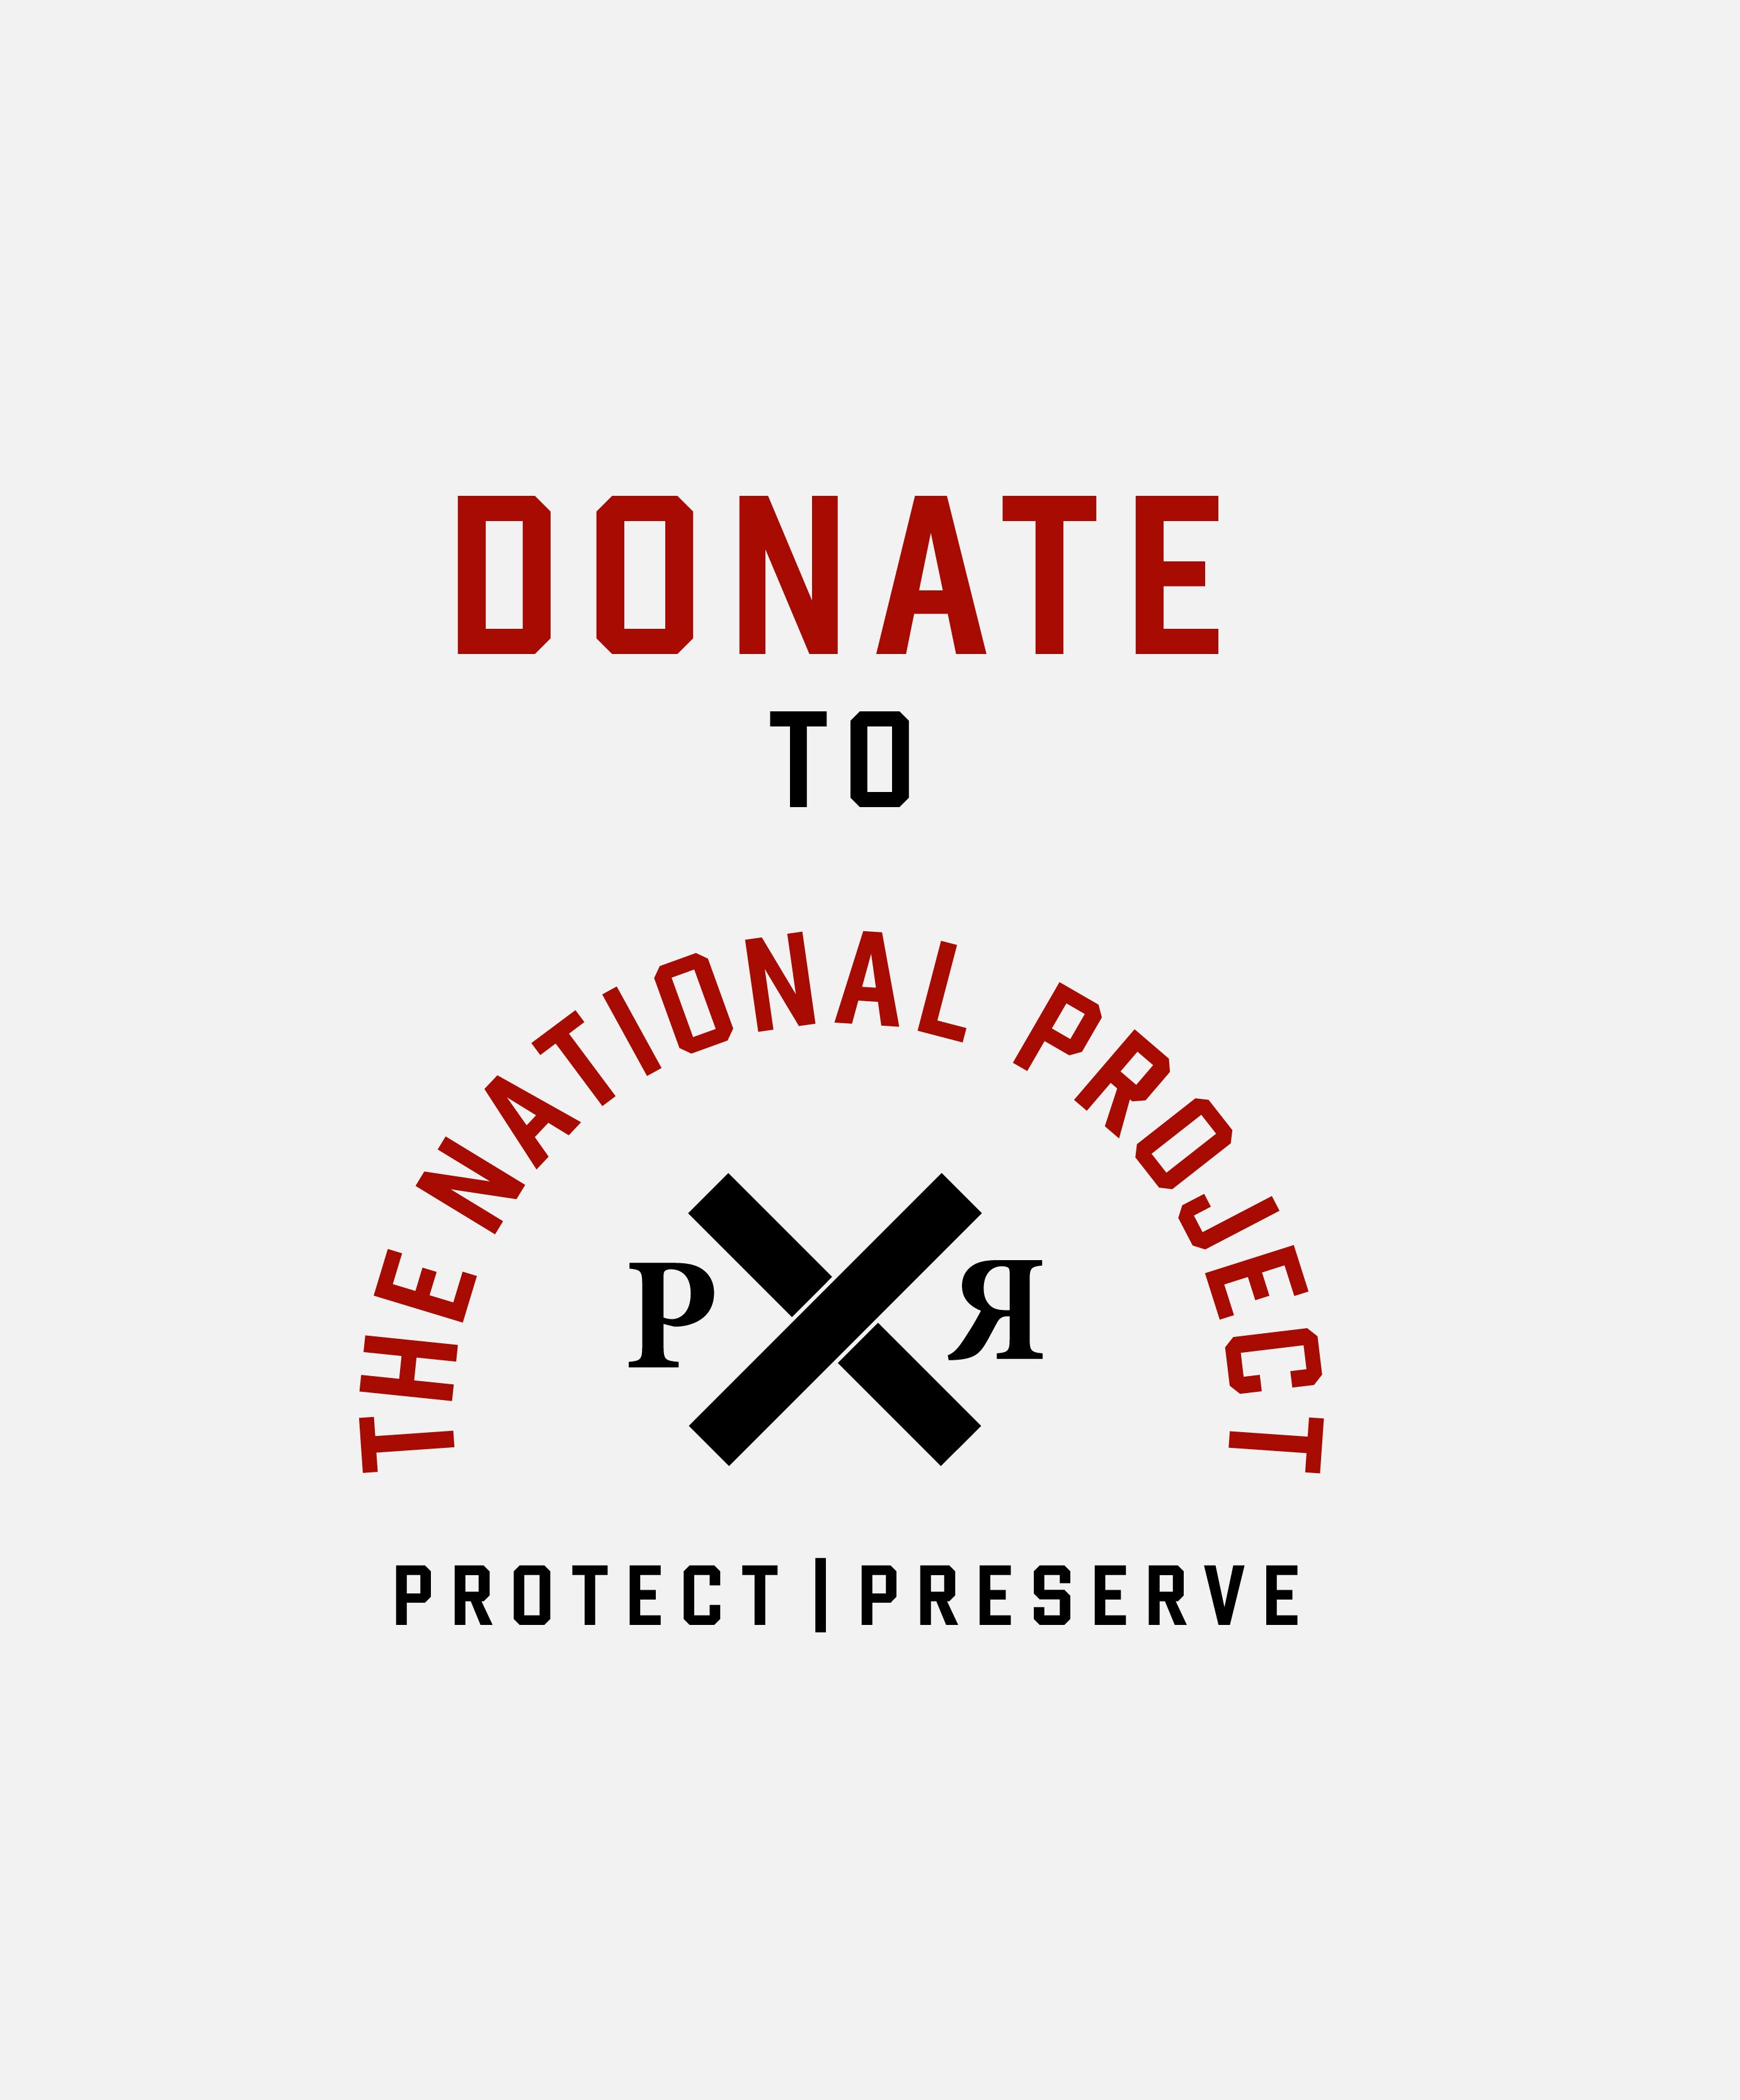 Donate to The National Project